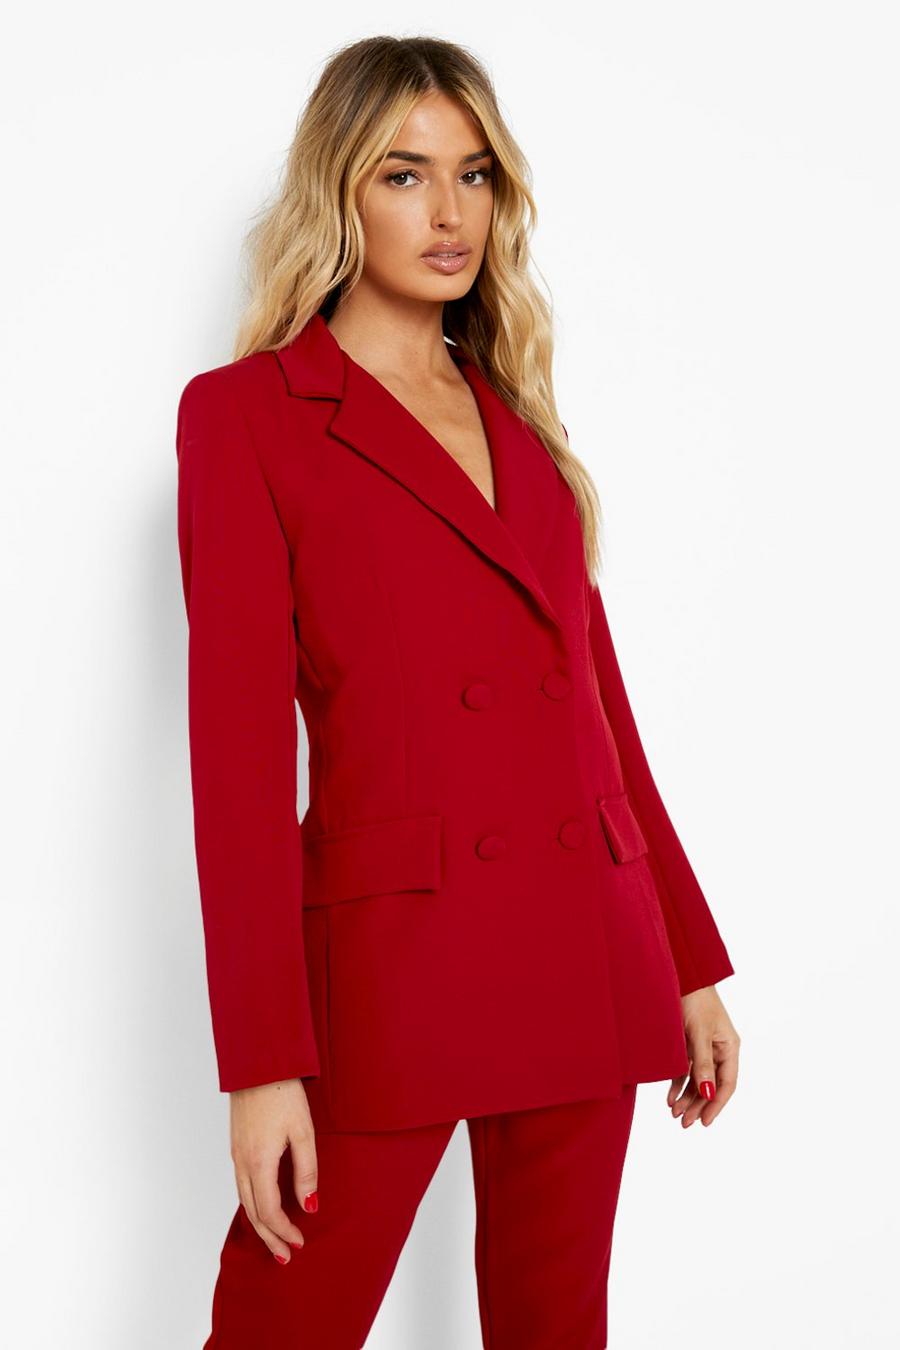 Blazer Jackets for Women Casual Double Breasted Oversized Blazers for Work Professional S-XL 